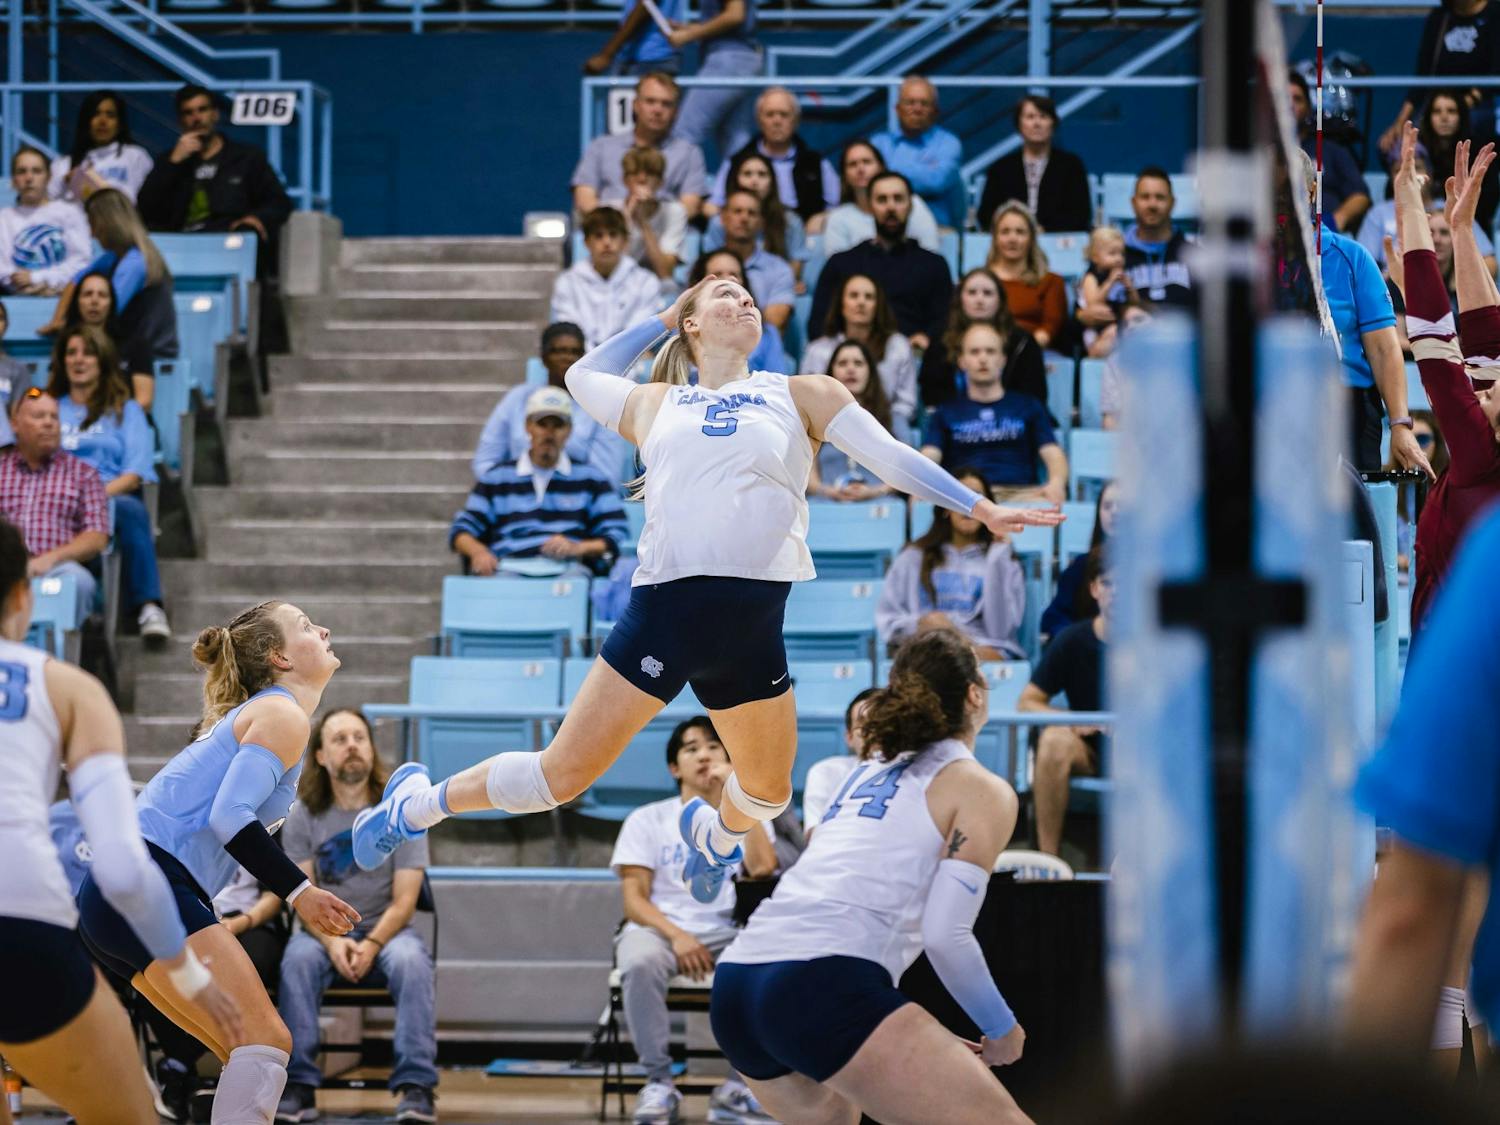 UNC graduate Charley Niego (5) spikes a ball early in the first set of the volleyball match against Boston College on Friday, Oct. 14, 2022. UNC beat Boston College 3-0.